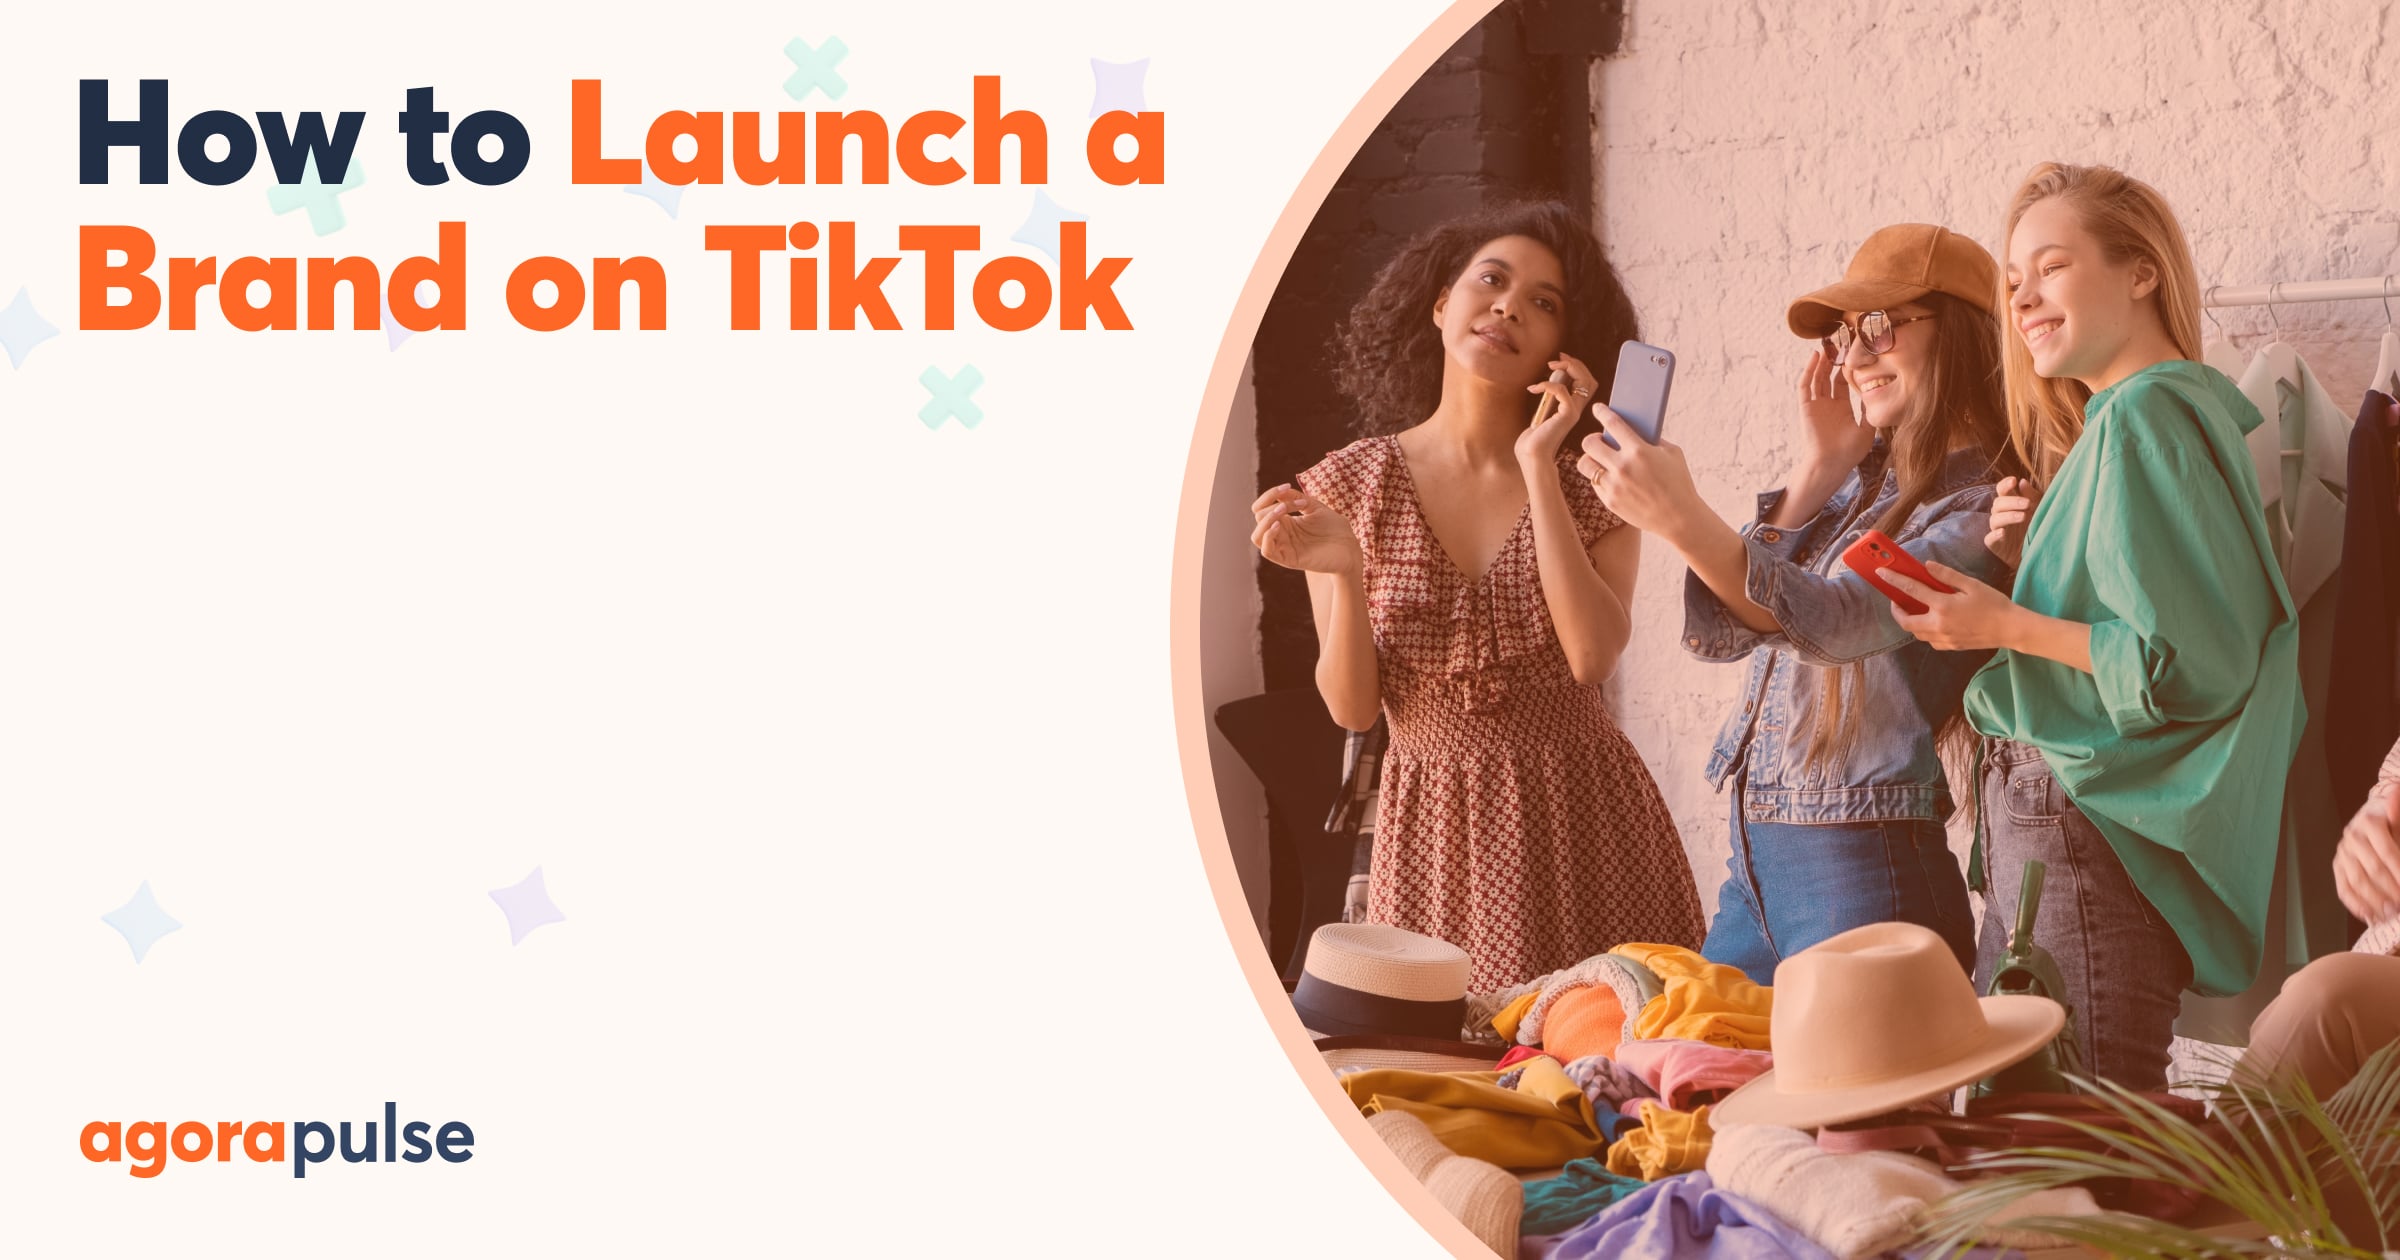 Launched a Storefront of Viral TikTok Products